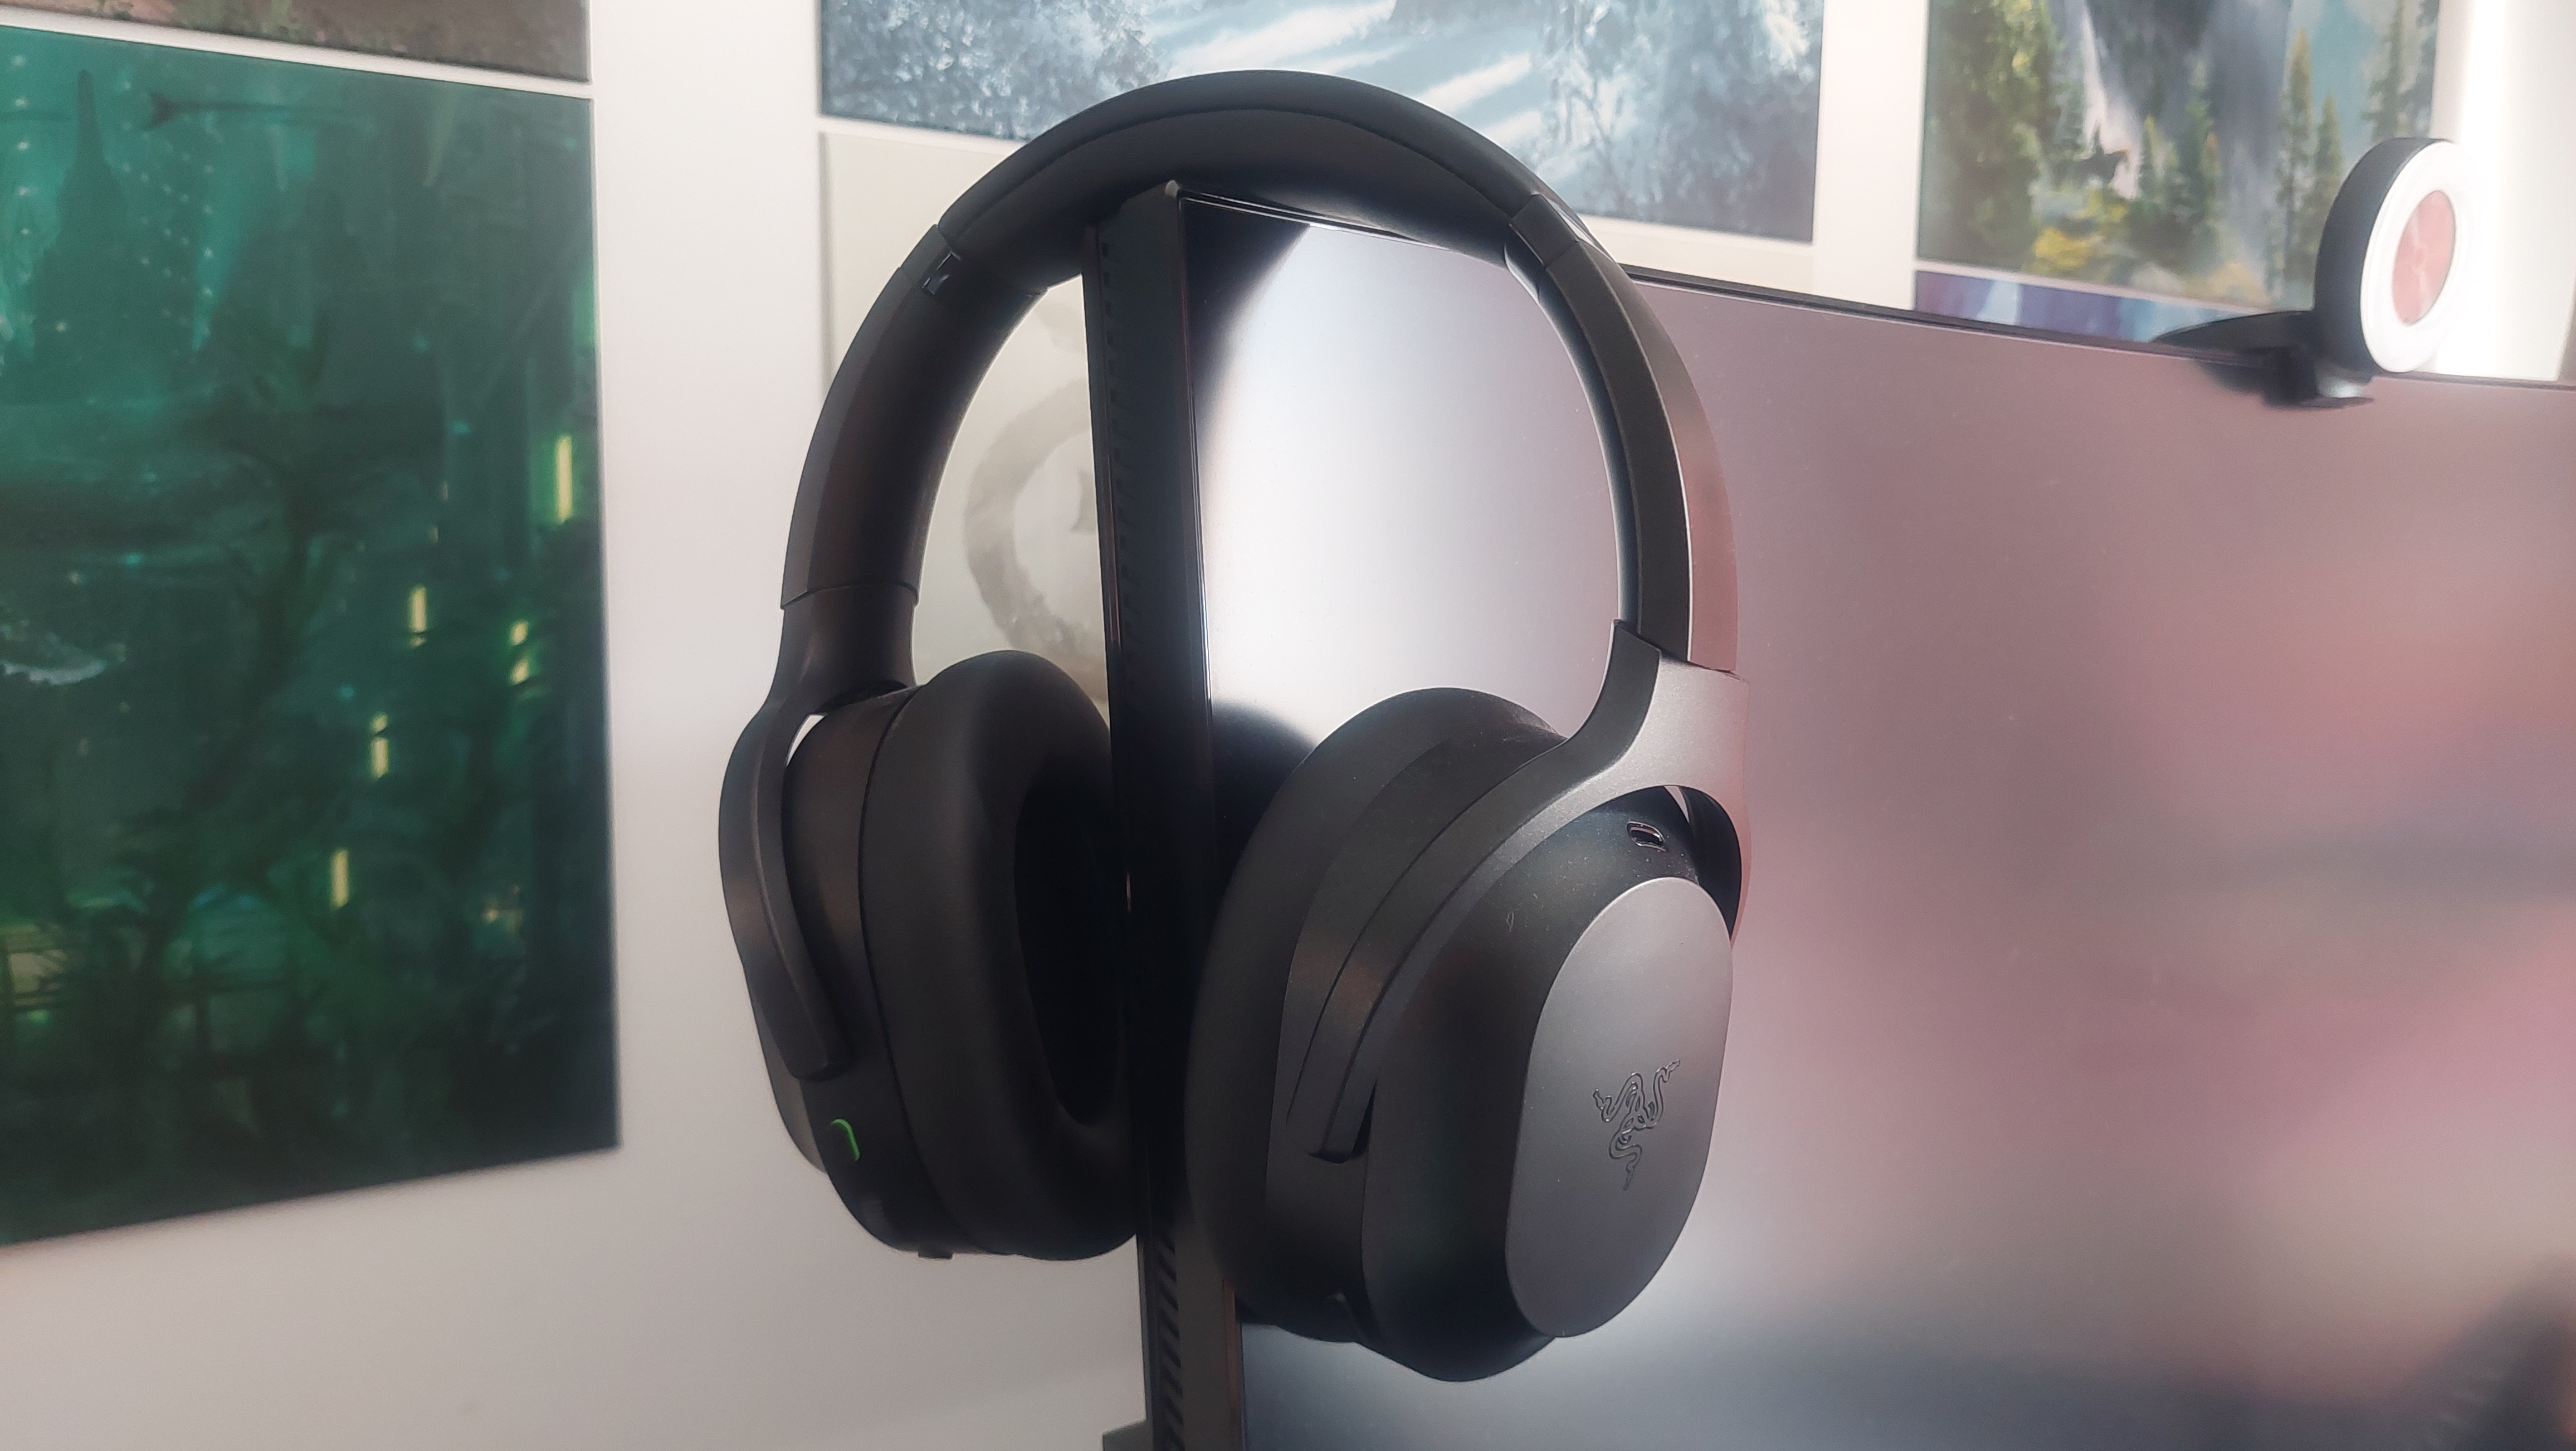 Razer's Barracuda Pro is its latest do-it-all gaming headset - The